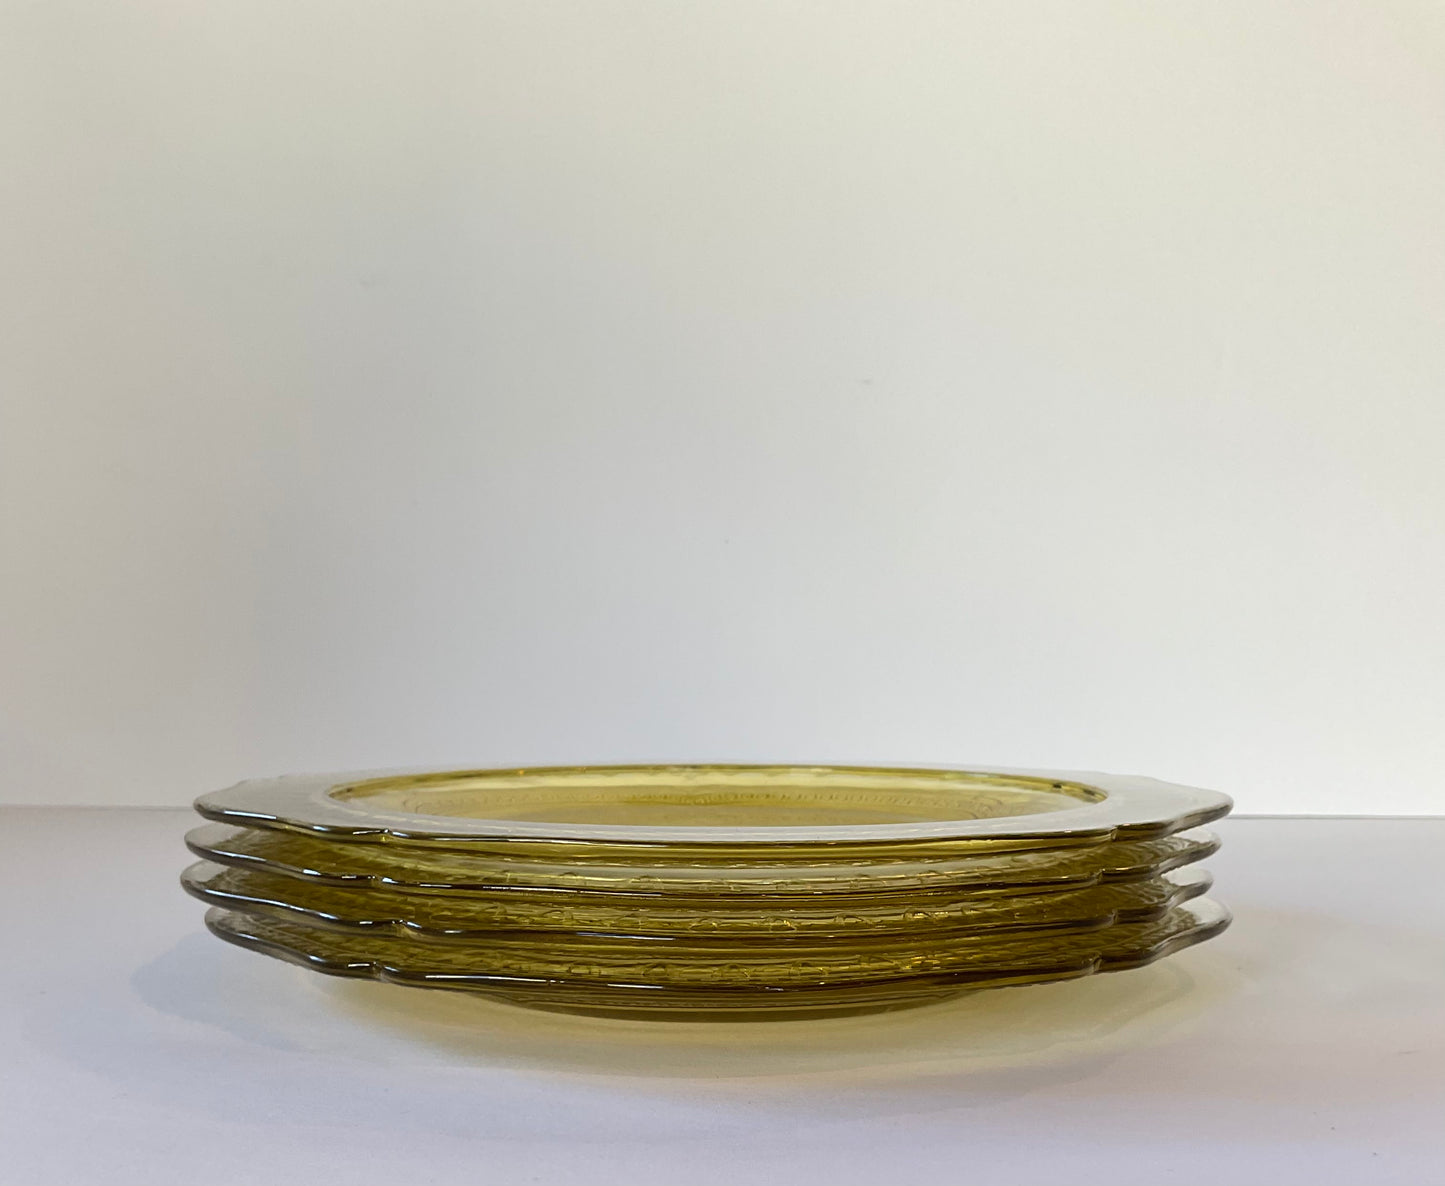 Vintage Depression Glass Yellow Patrician Spoke Luncheon Plate, 9", Set of 4